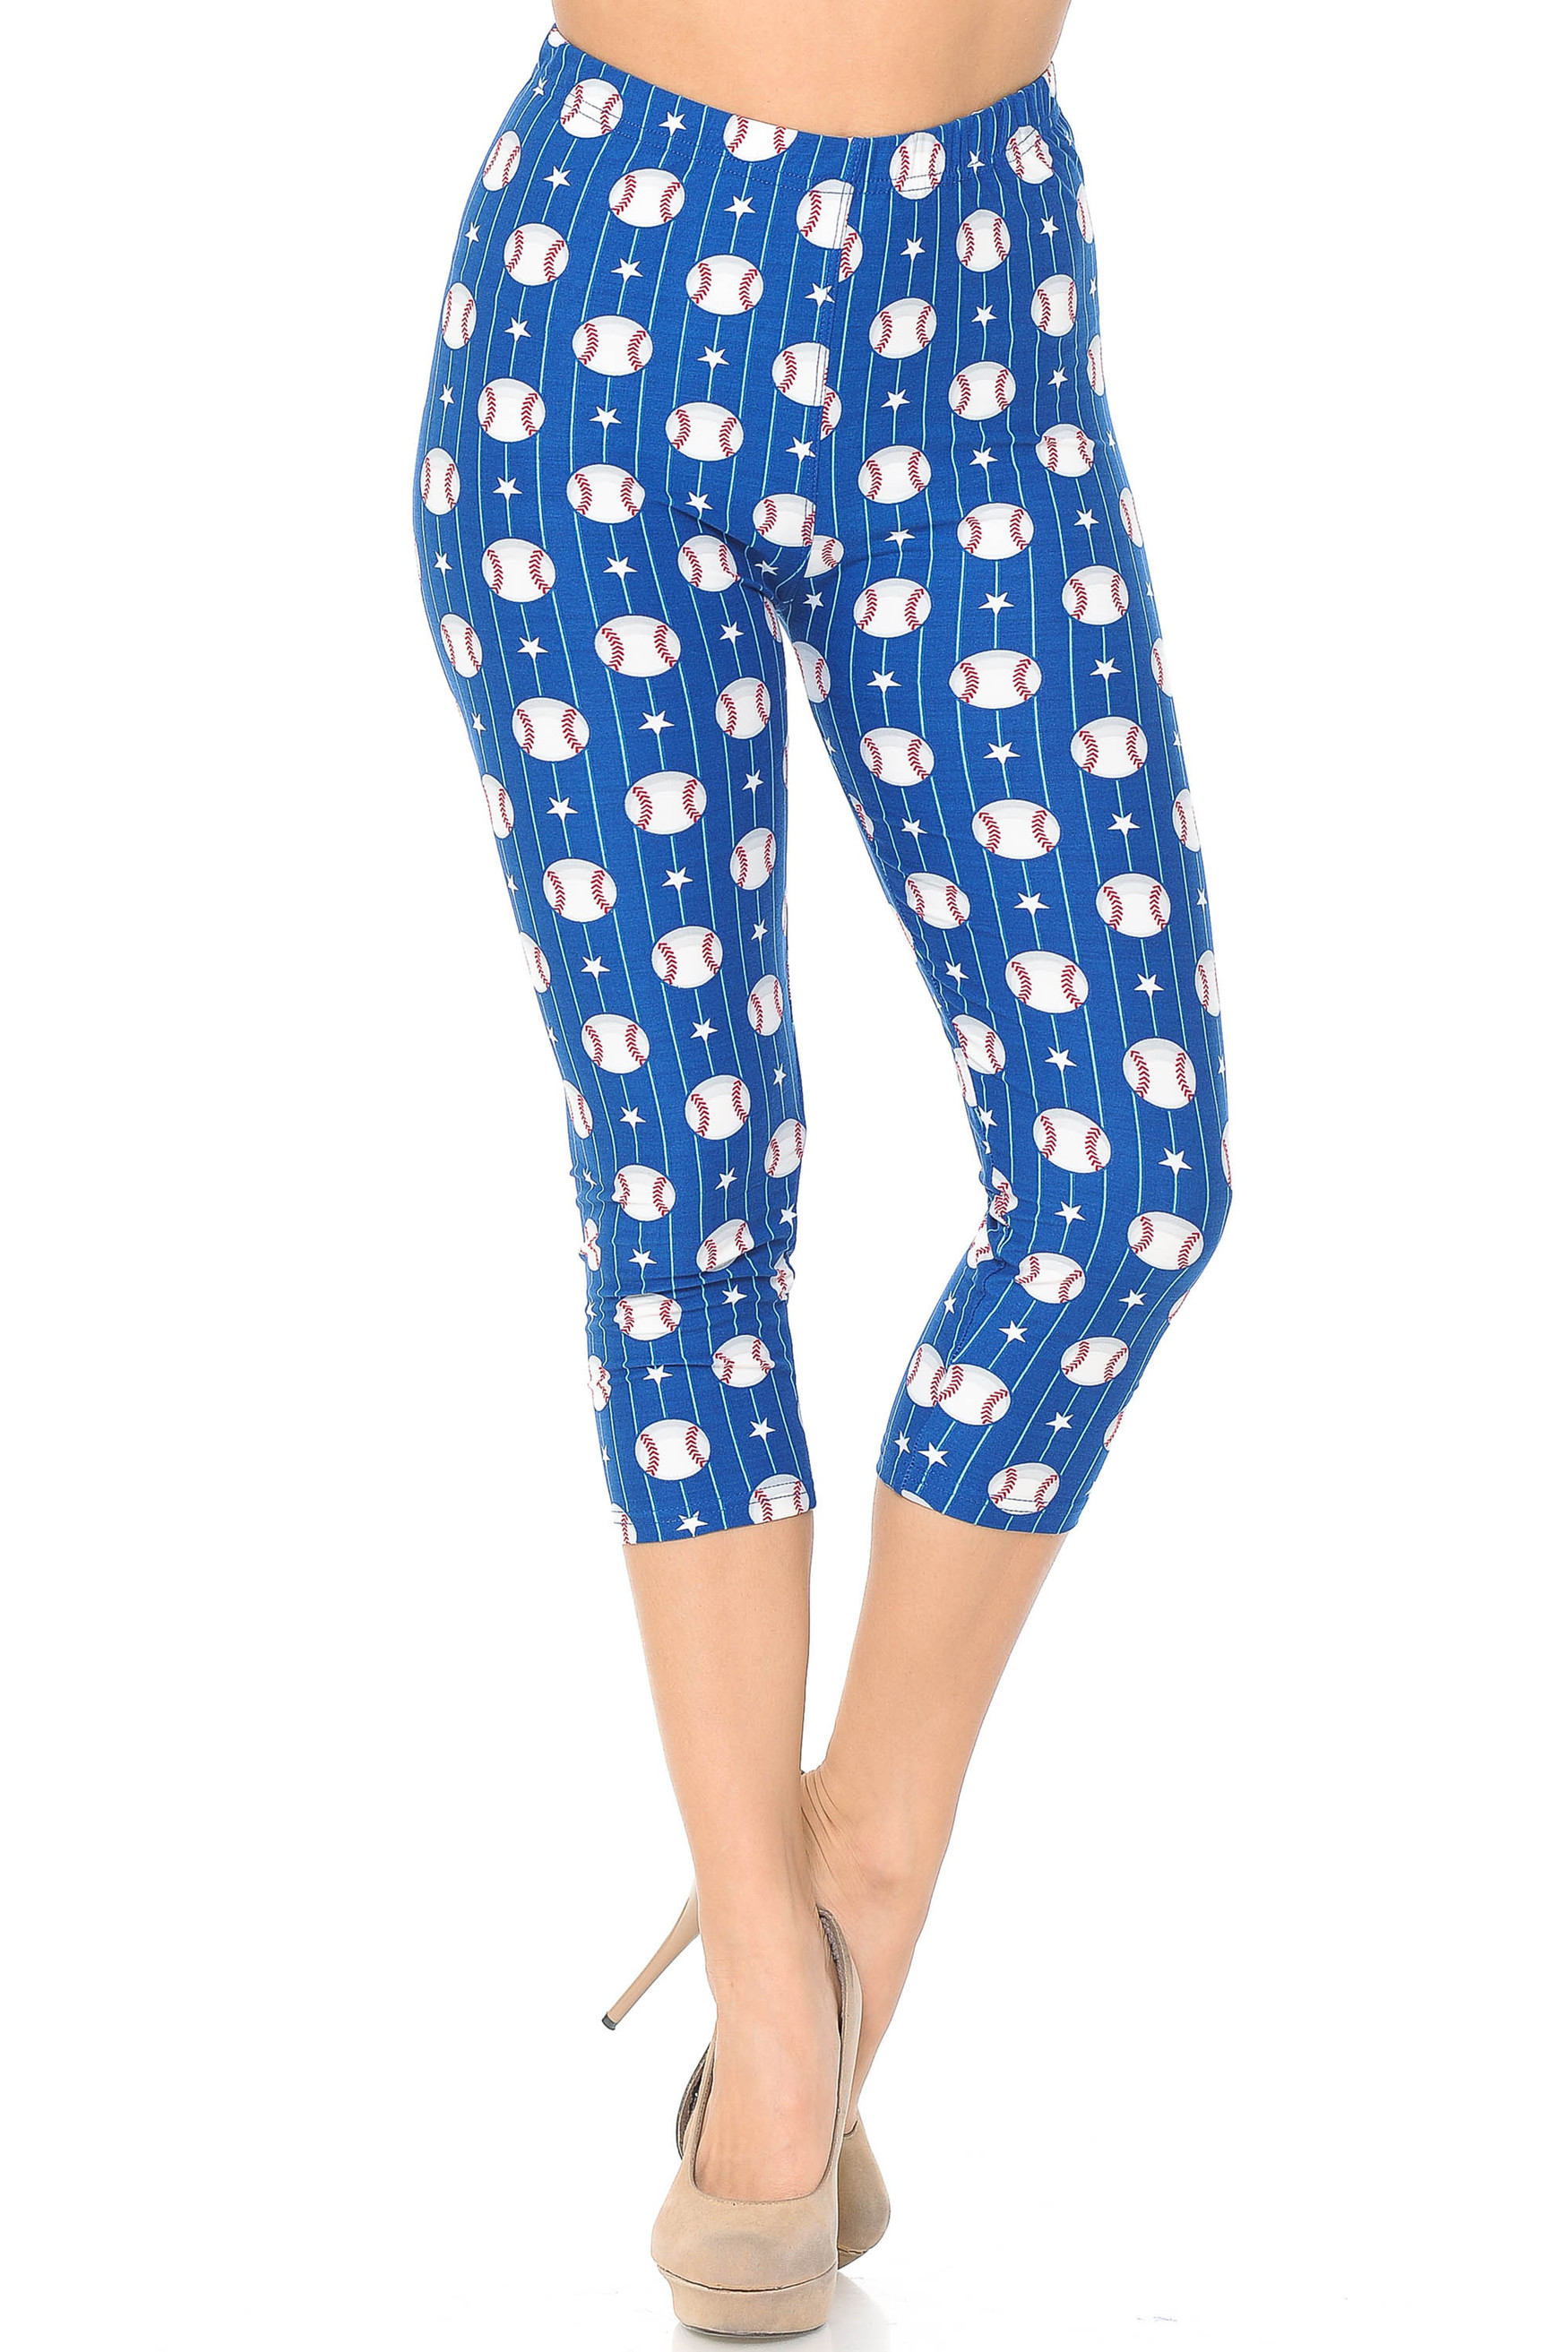 Buttery Soft Love of Baseball Plus Size Capris